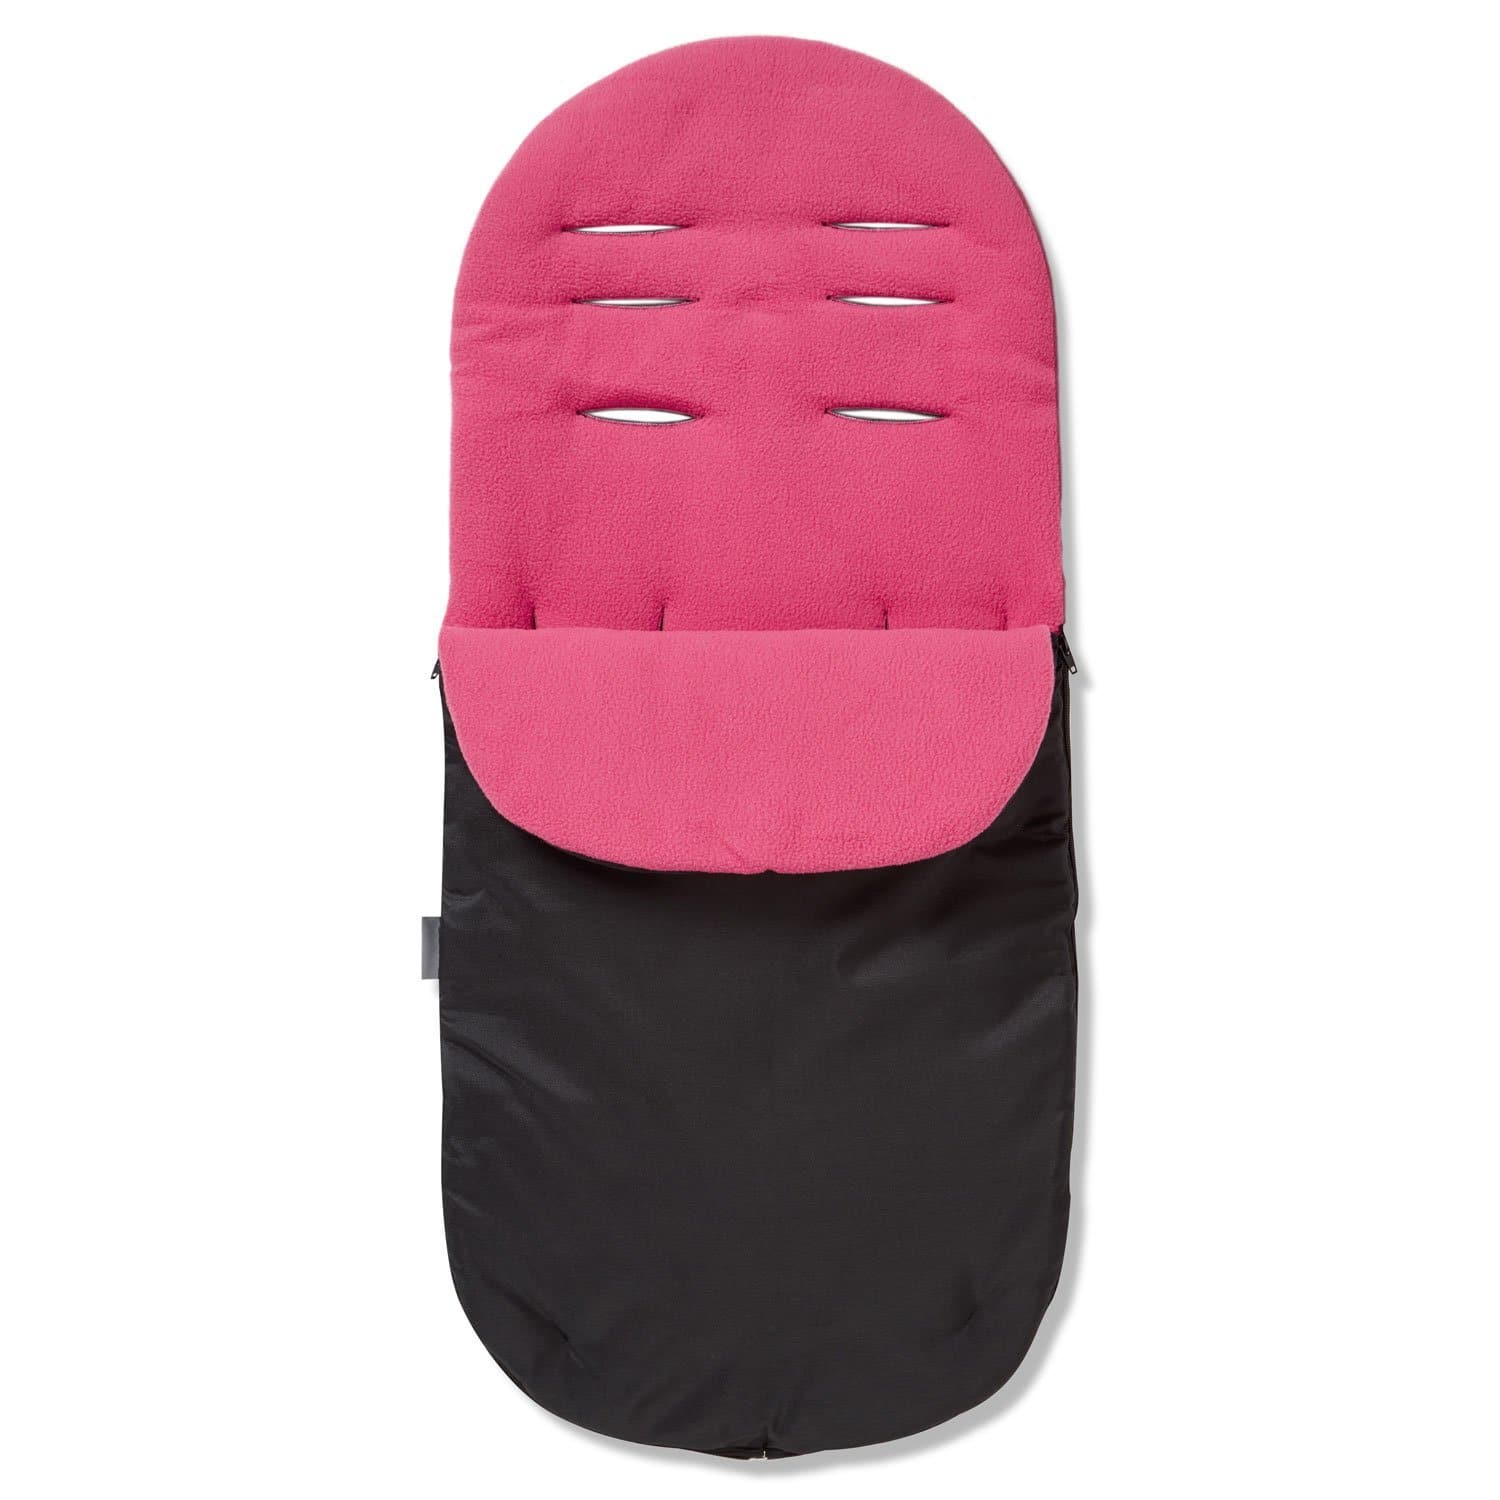 Footmuff / Cosy Toes Compatible with Mamas & Papas - For Your Little One